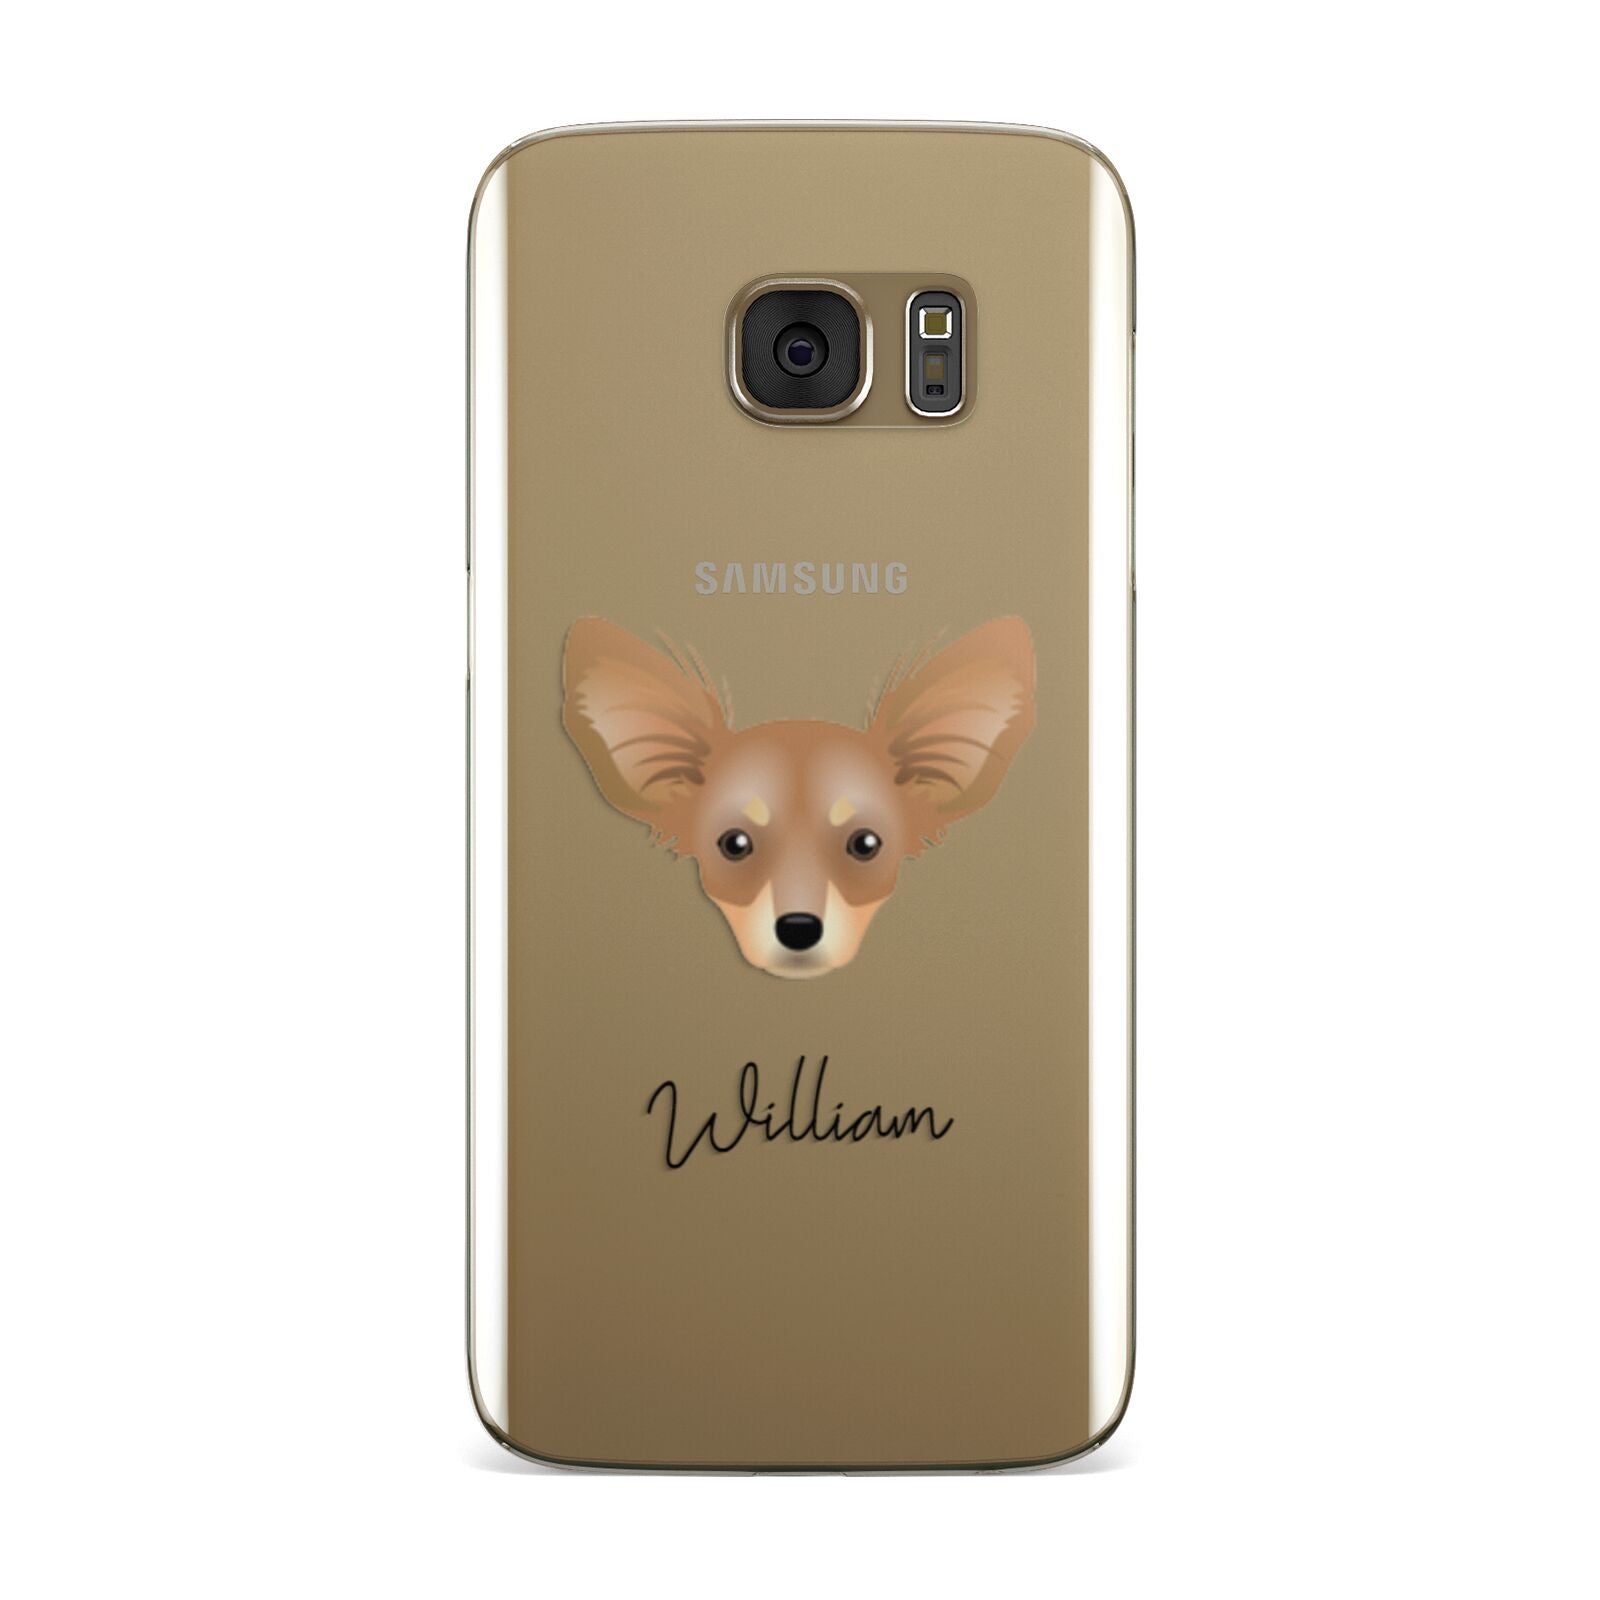 Russian Toy Personalised Samsung Galaxy Case